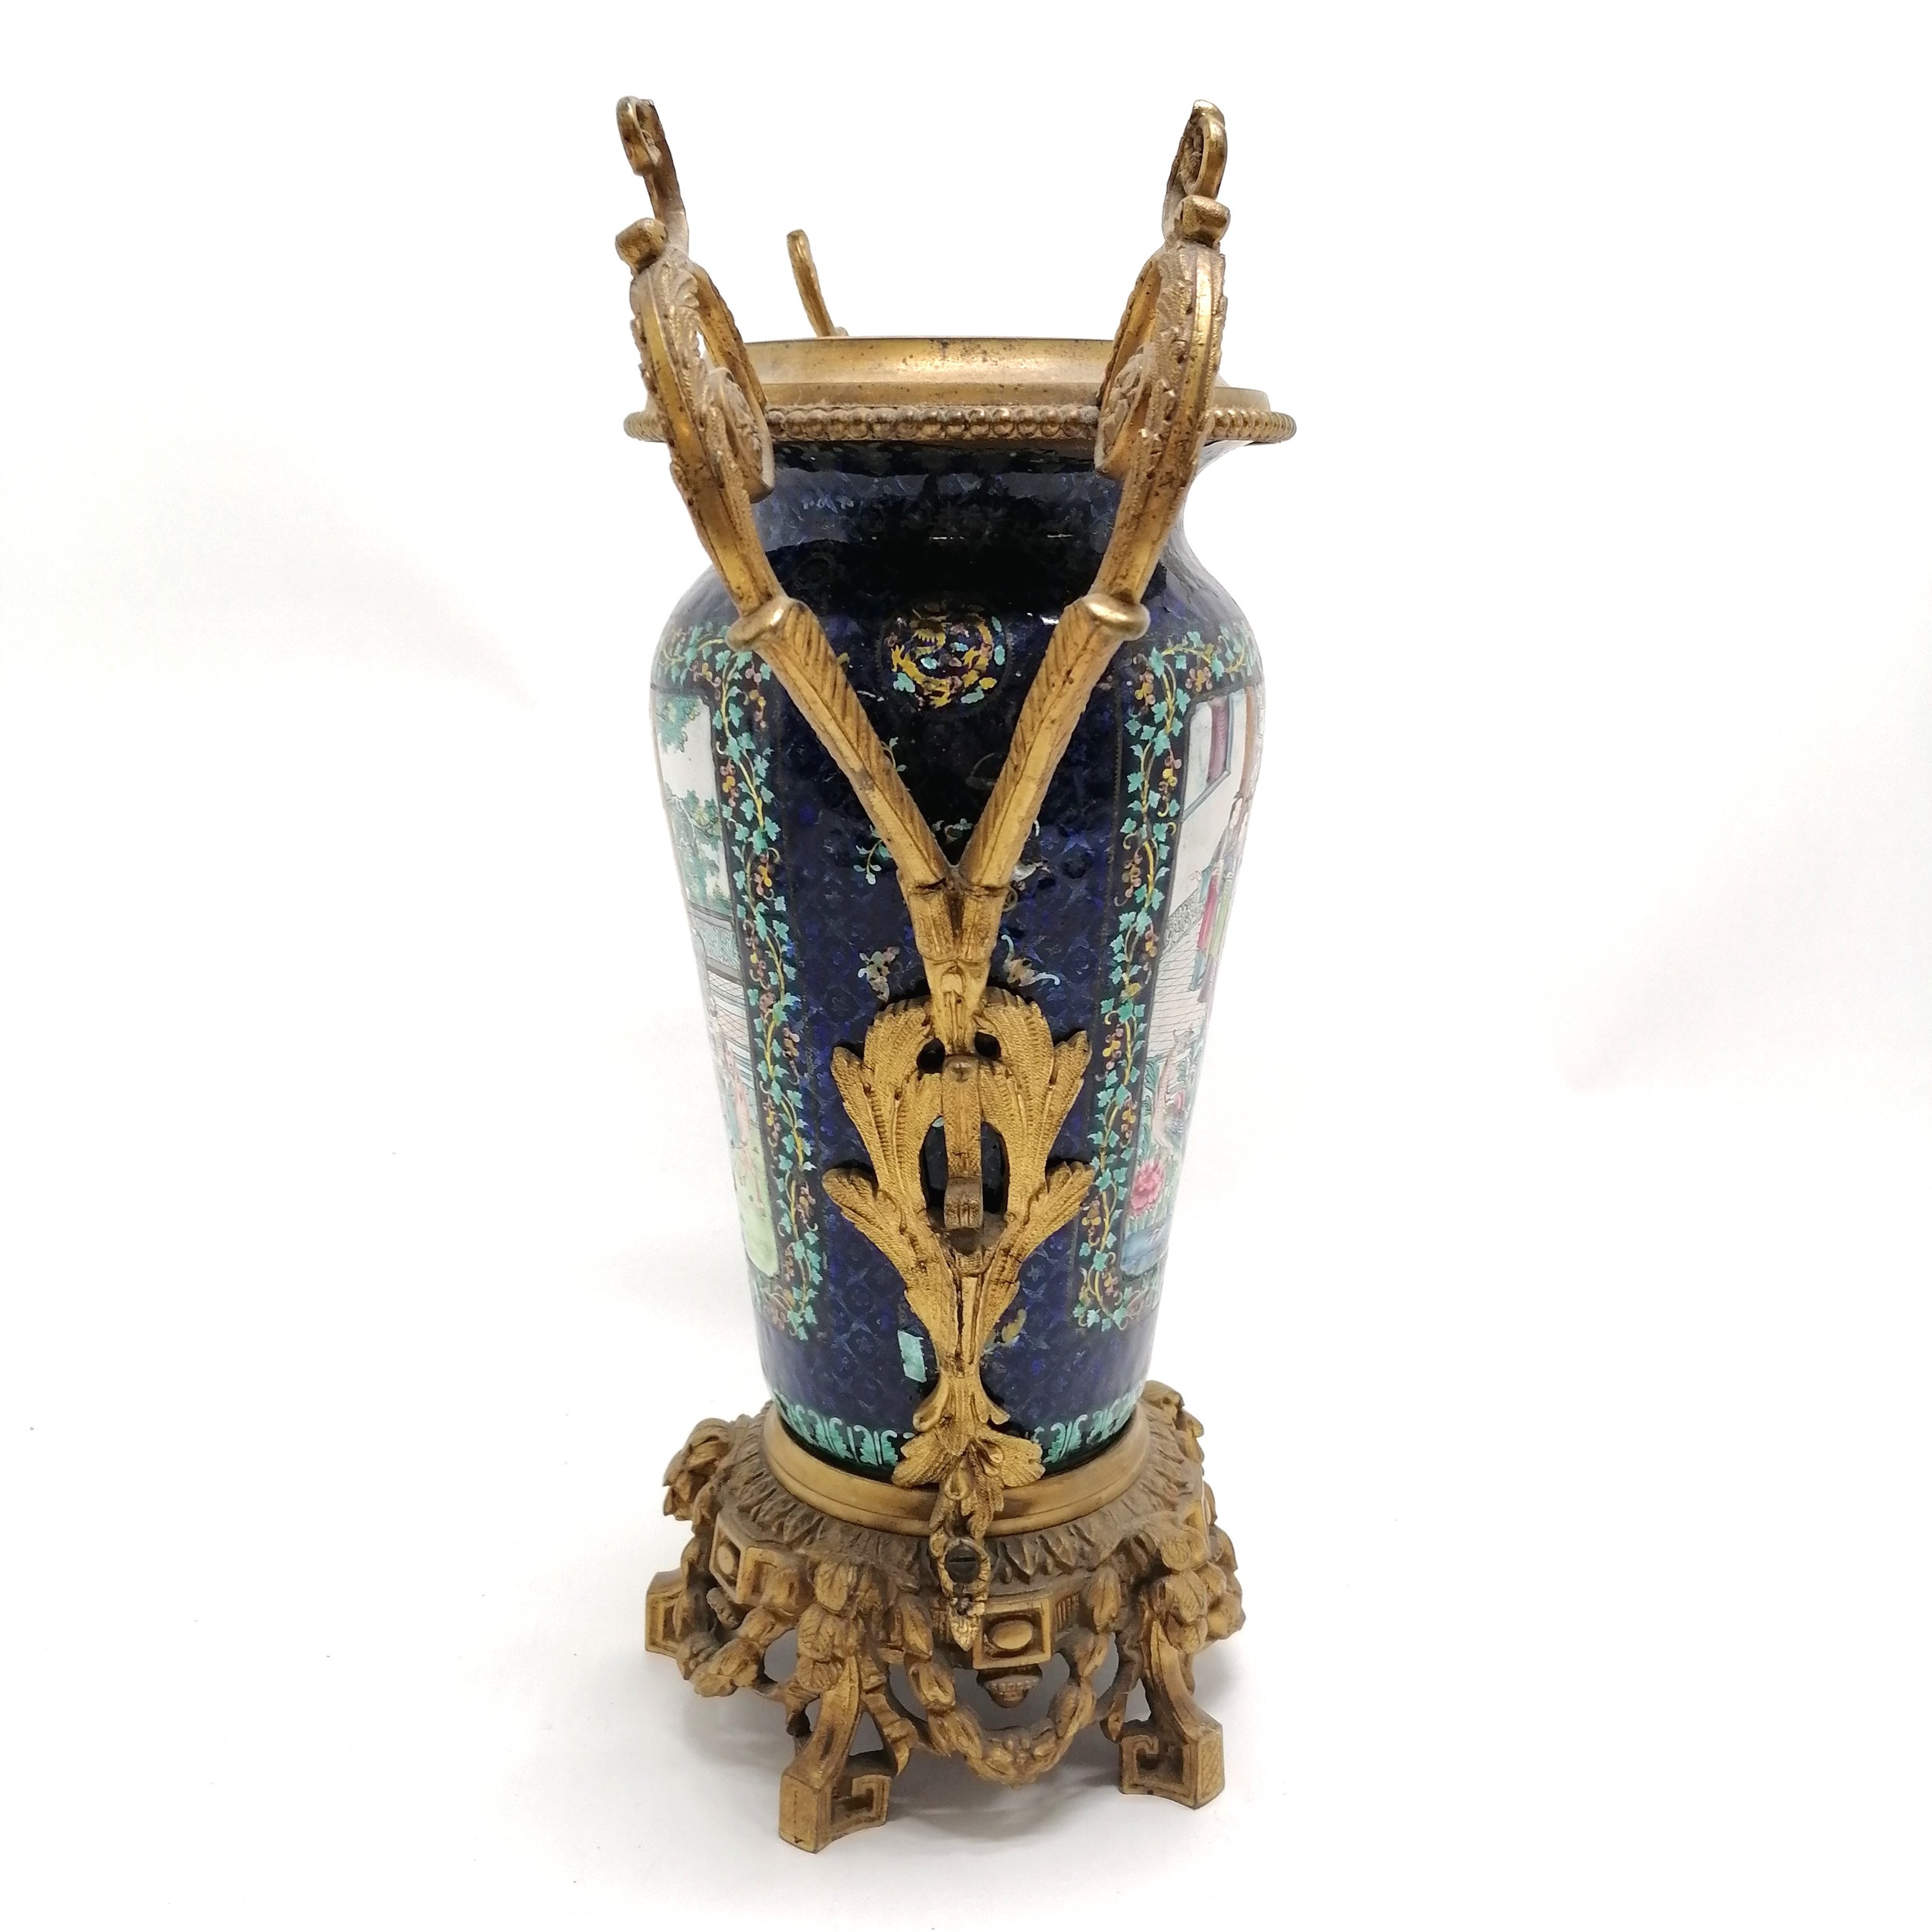 Antique Chinese Cantonese enamelled vase with French ormolu mounts - 35cm high missing it's lid - Image 4 of 8